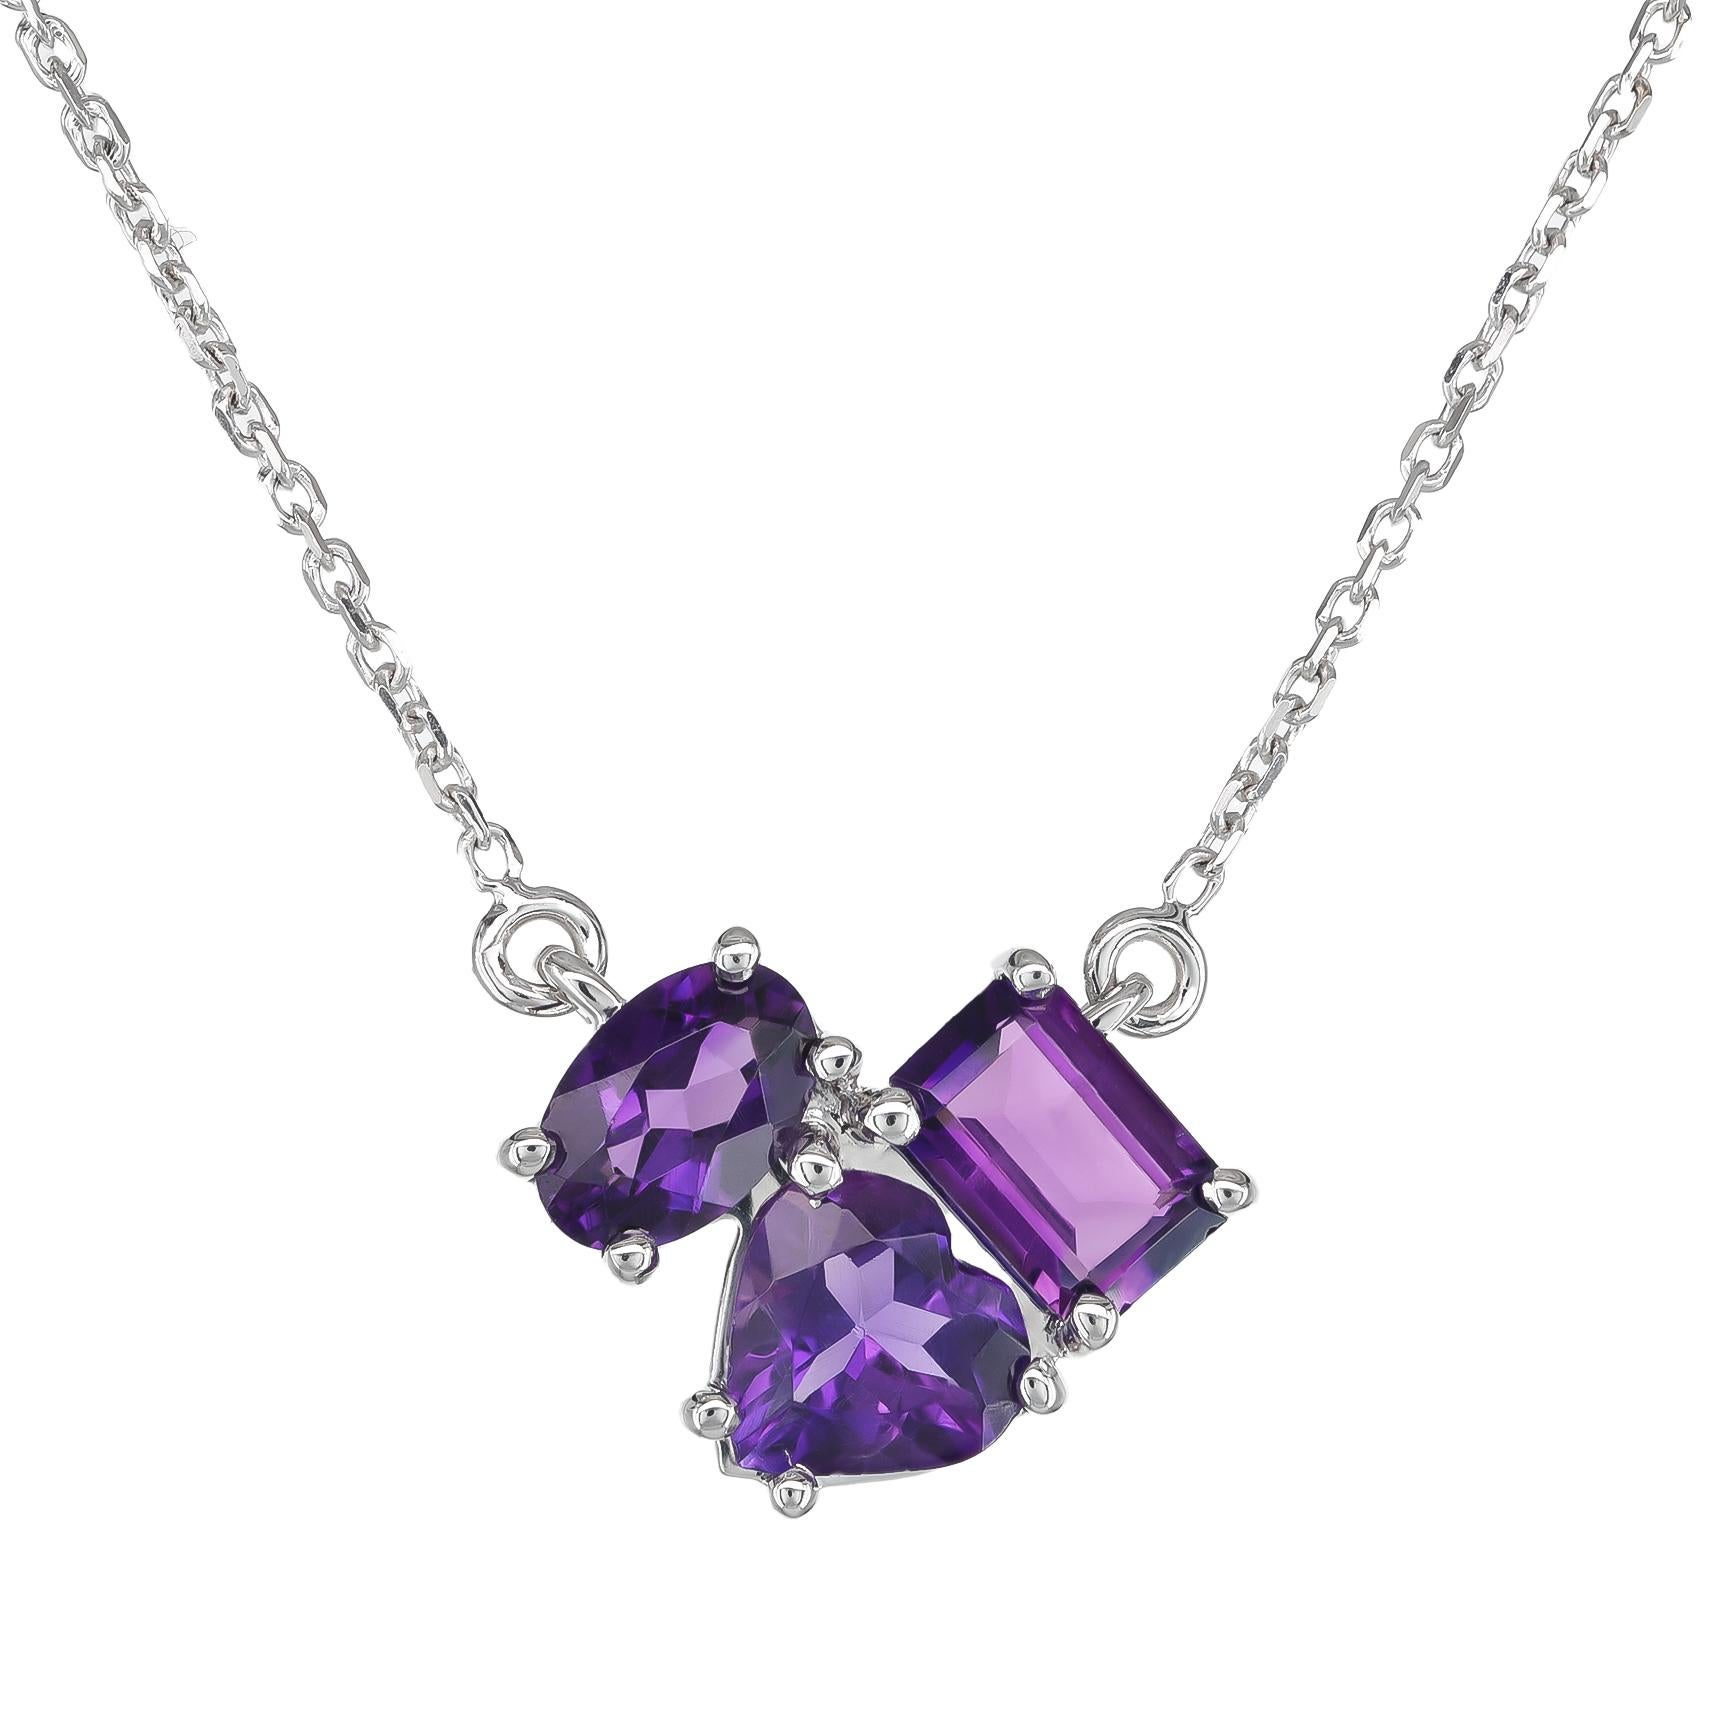 Pendant with 1.42 carats Amethyst set in 14K White Gold In New Condition For Sale In Los Angeles, CA